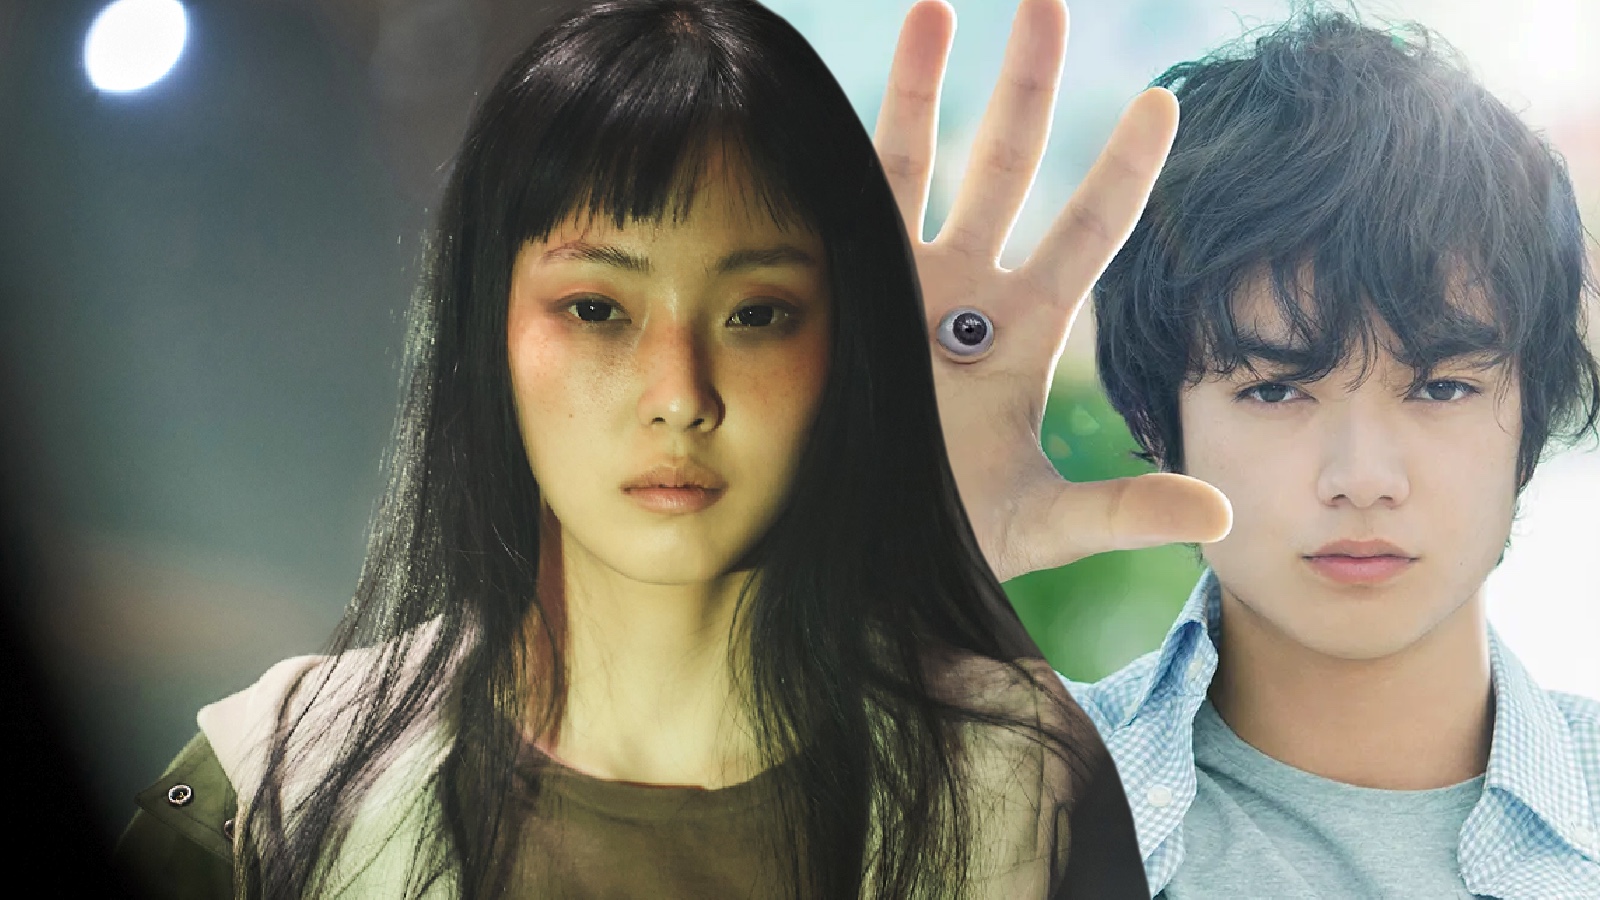 Parasyte The Grey: Release Date, Plot, Cast And What To Expect From The  Series Based On Anime And Manga